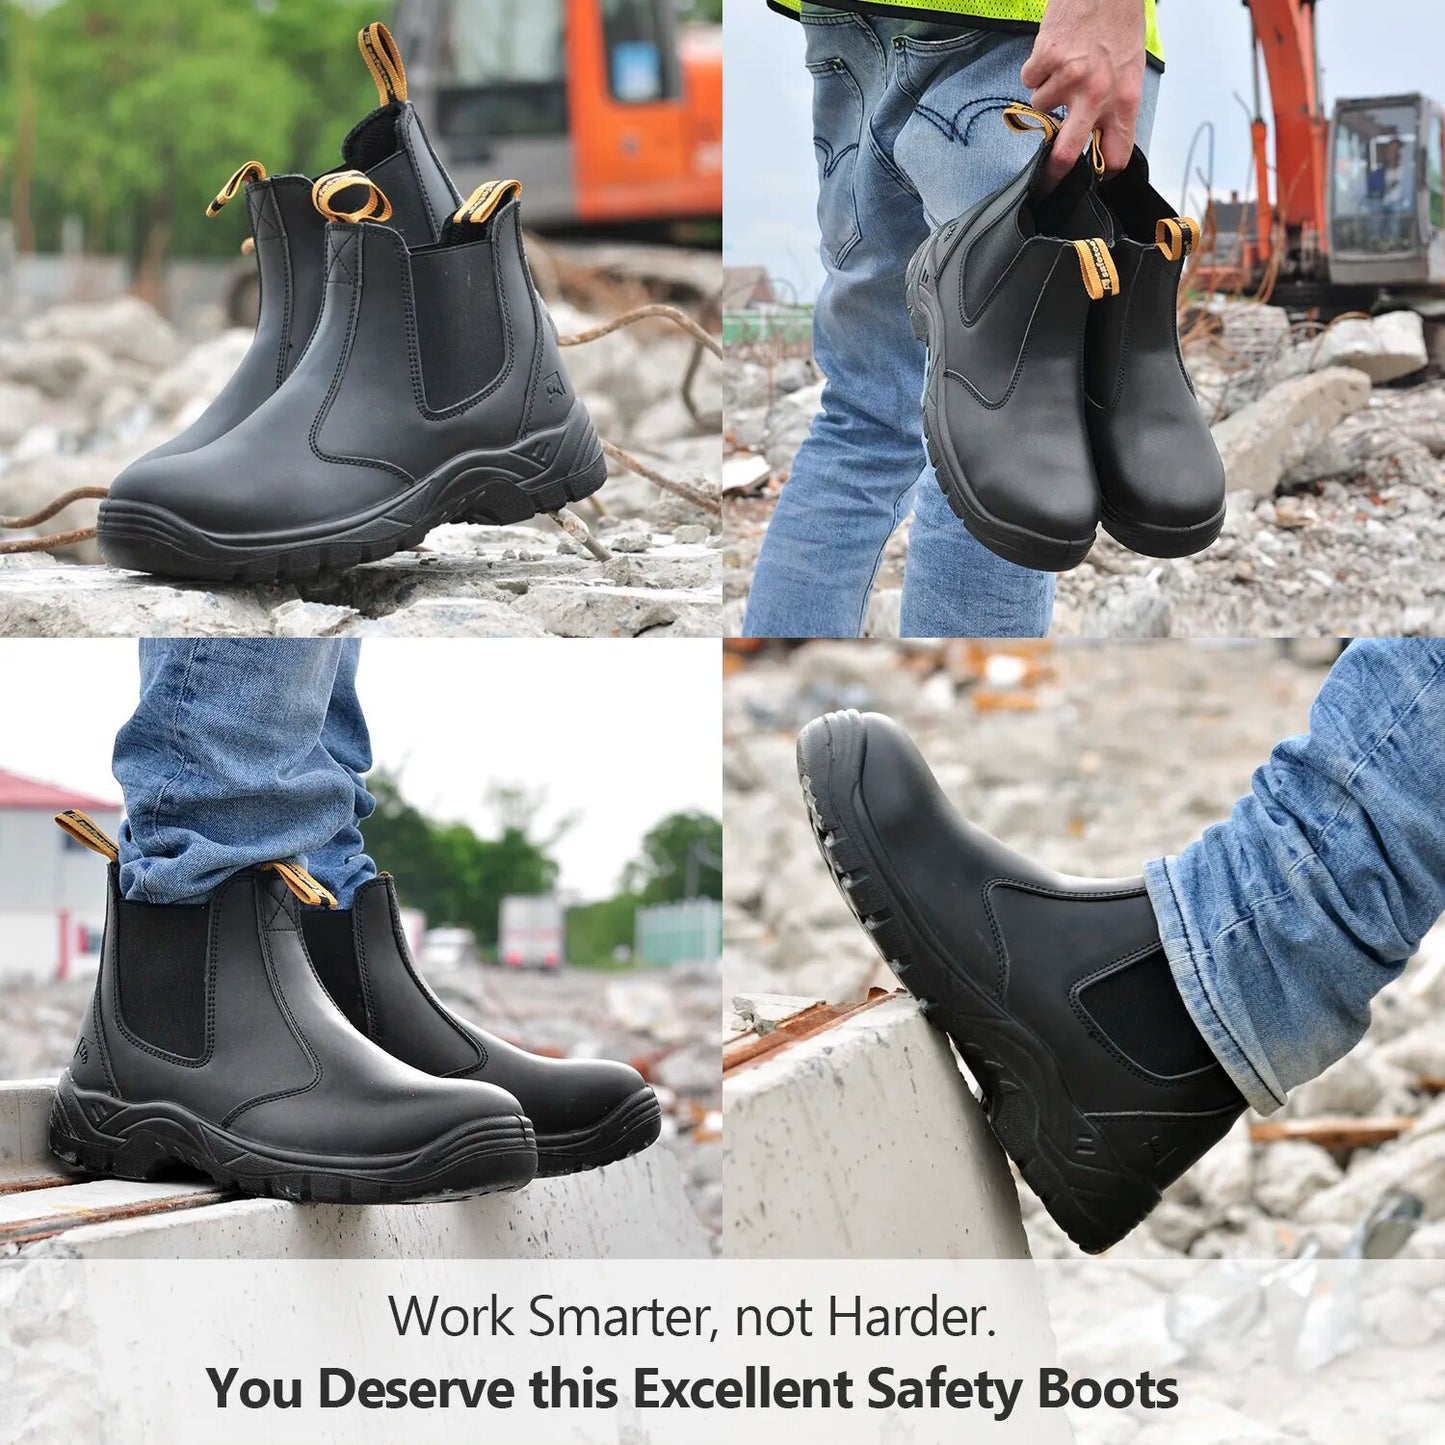 SAFETOE S3 Safety Shoes Light Weight Work Boots/With Steel Toe Cap, Waterproof Leather For Men